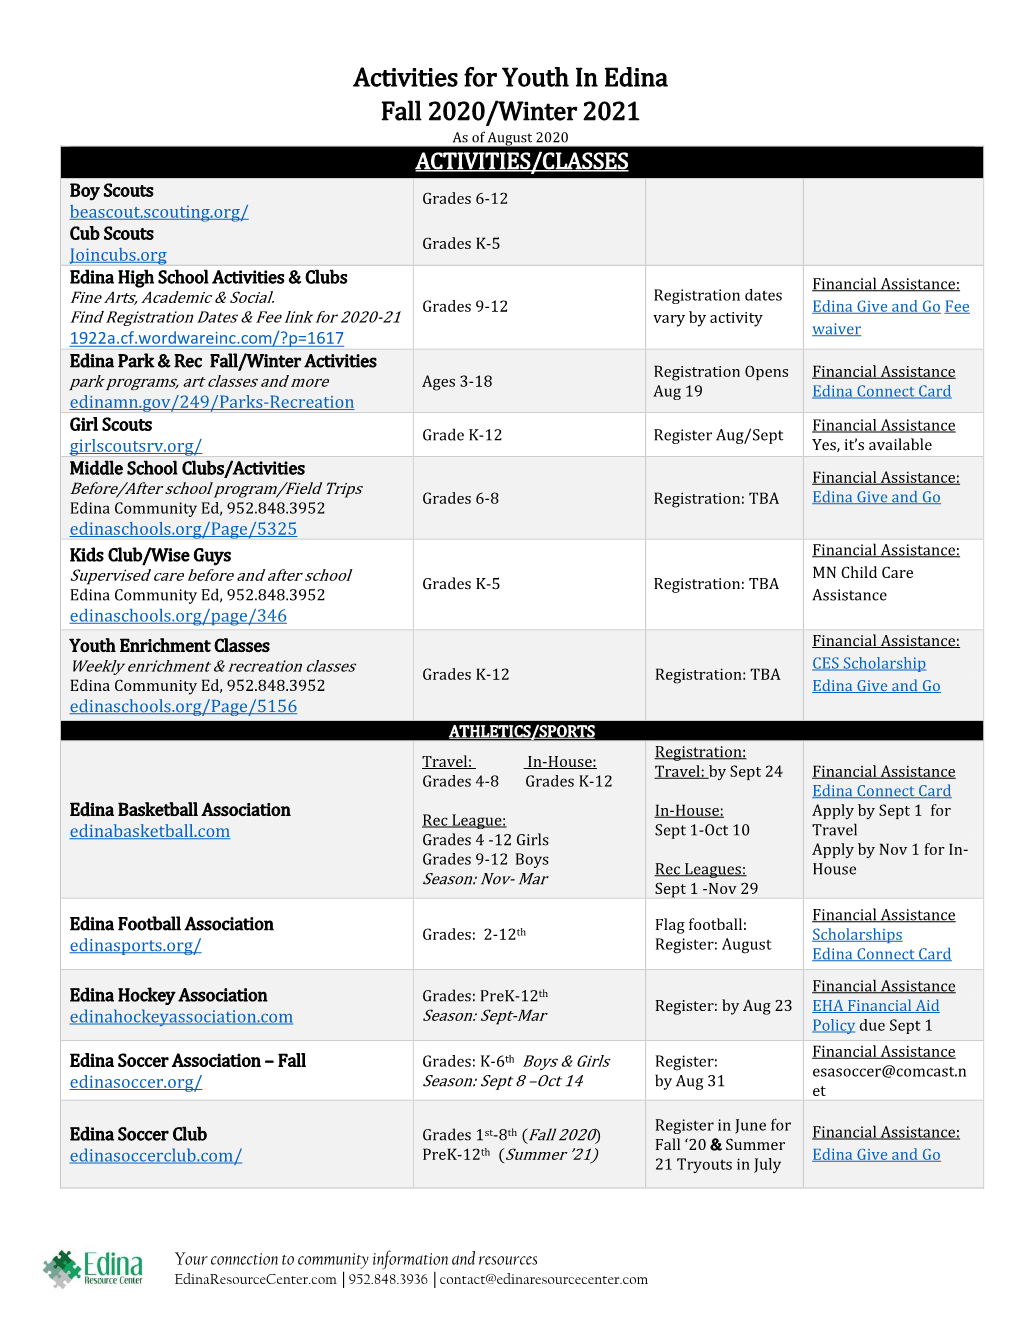 Activities for Youth in Edina Fall 2020/Winter 2021 As of August 2020 ACTIVITIES/CLASSES